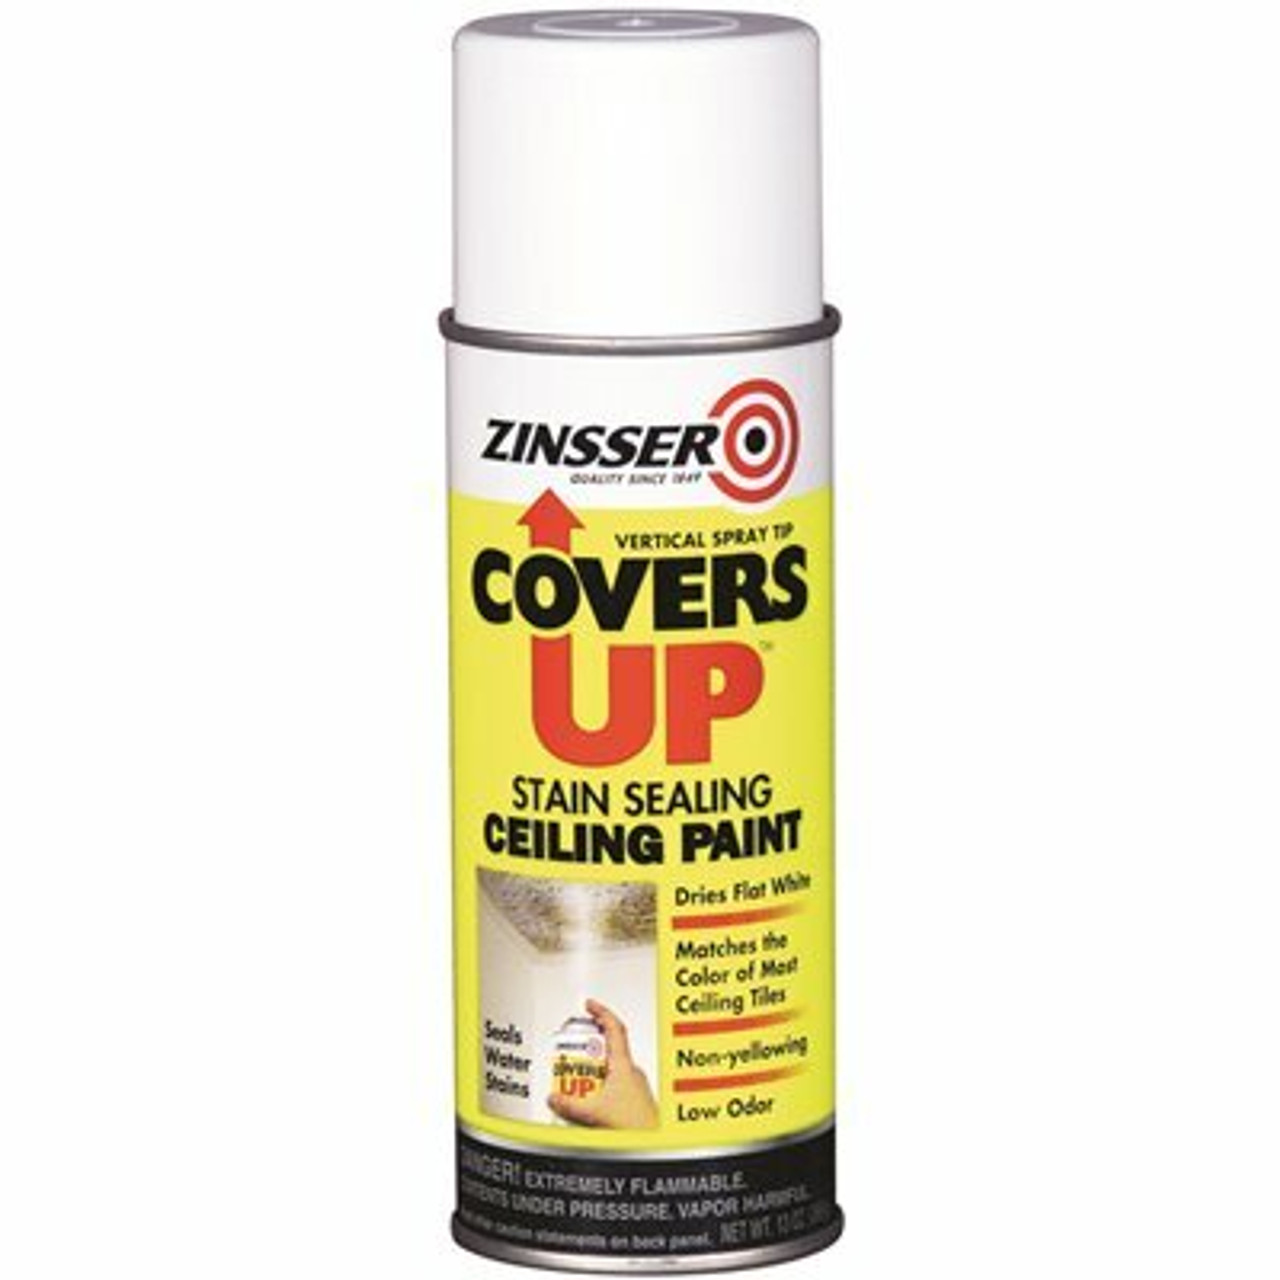 Zinsser 13 Oz. Covers Up Paint And Primer In One Spray For Ceiling